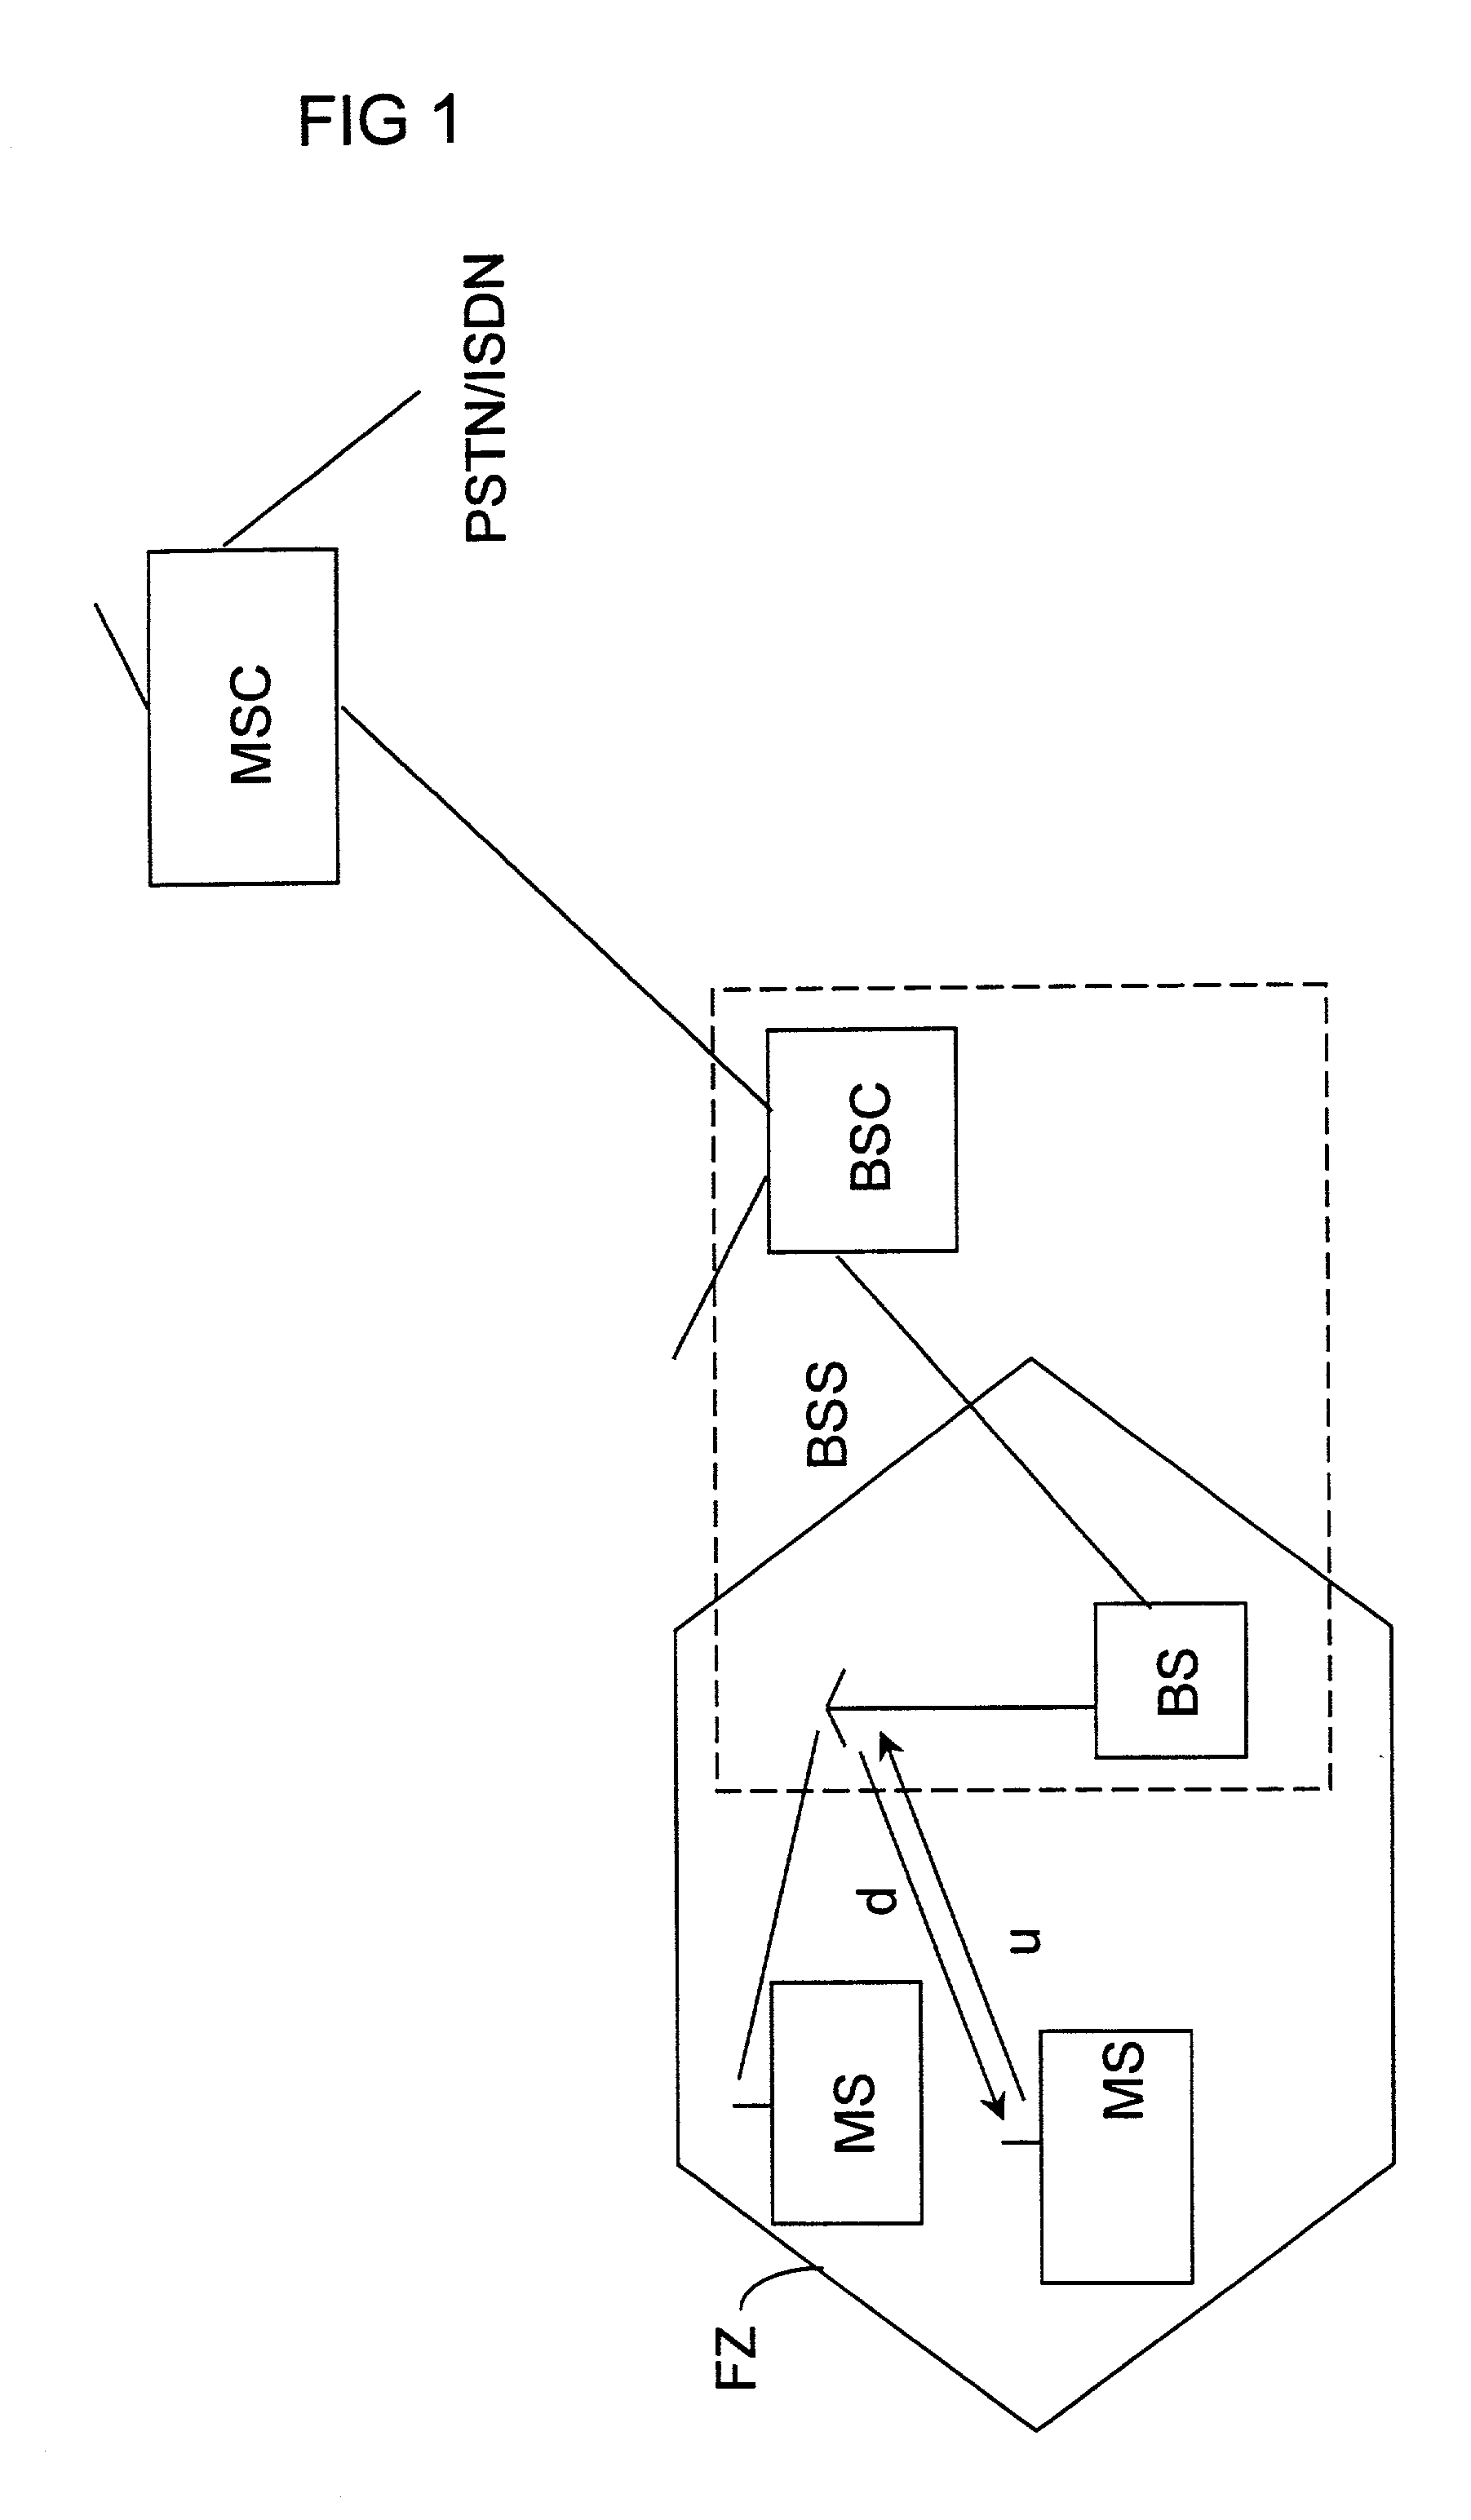 Method for synchronizing a base station with a mobile station, a base station and a mobile station